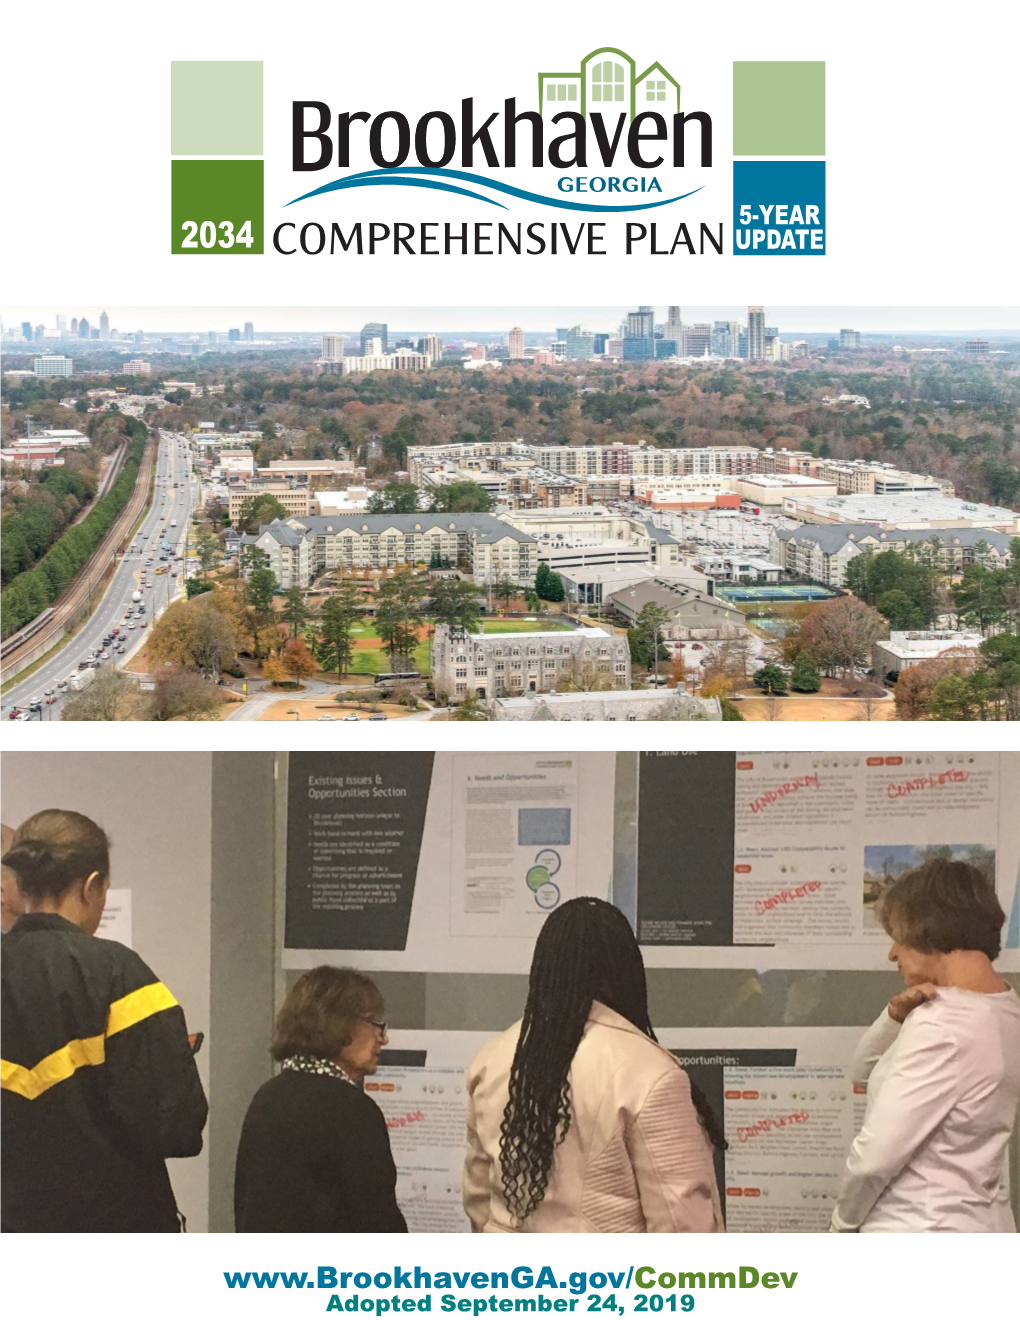 Final City of Brookhaven 5 Year Comprehensive Plan Update